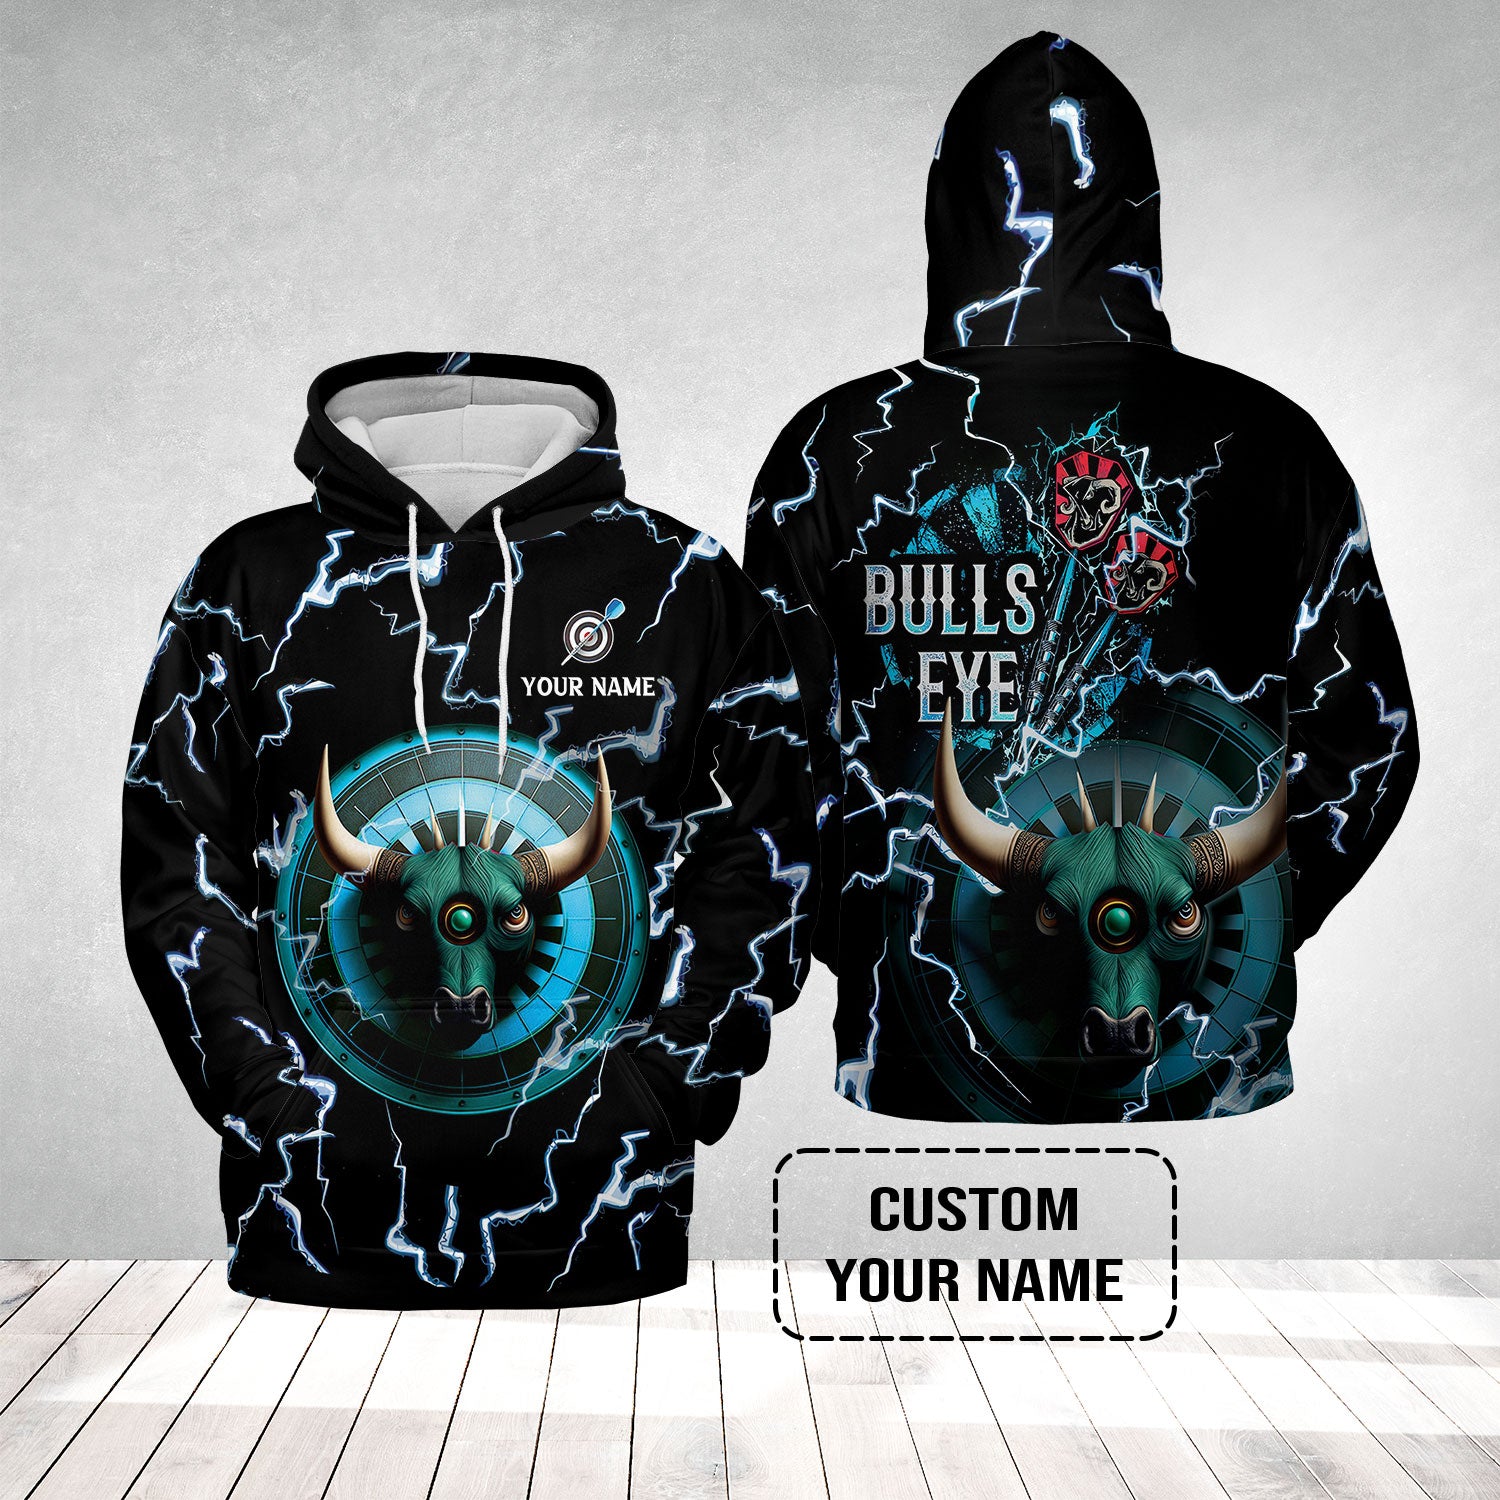 Customized Darts Hoodie, Bullseye Dartboard, Personalized Name Darts And Bull Hoodie - Perfect Gift For Darts Lovers, Darts Players